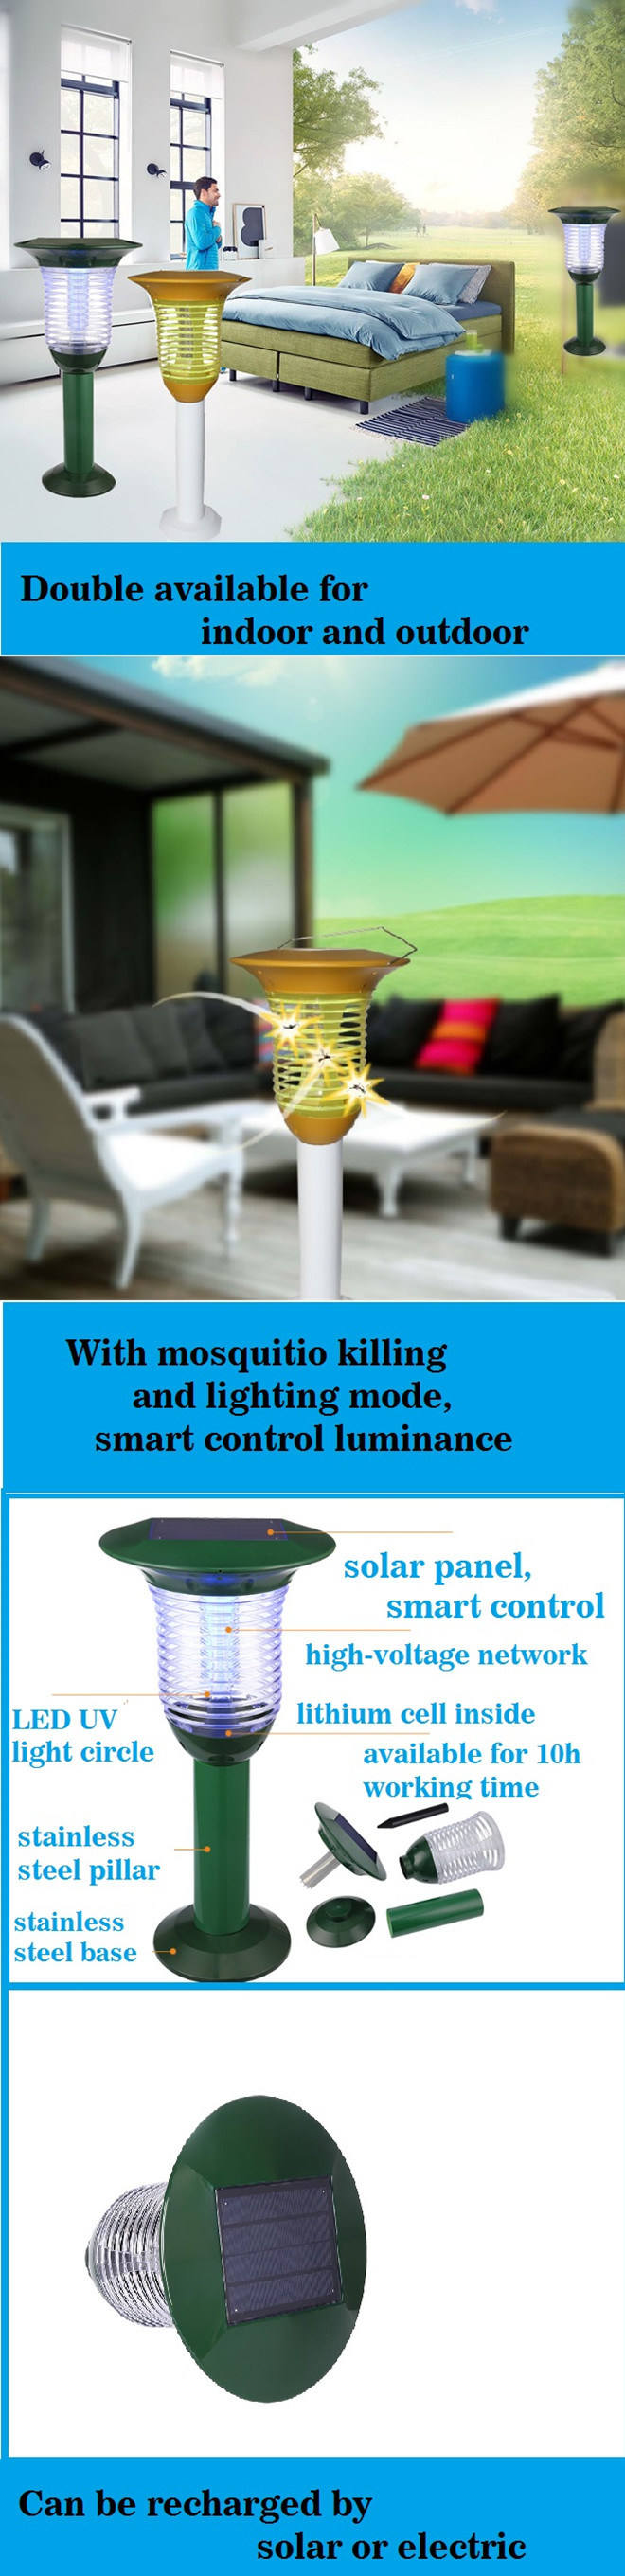 Outdoor and Indoor Solar Panel Insect Mosquito Killer with LED Light